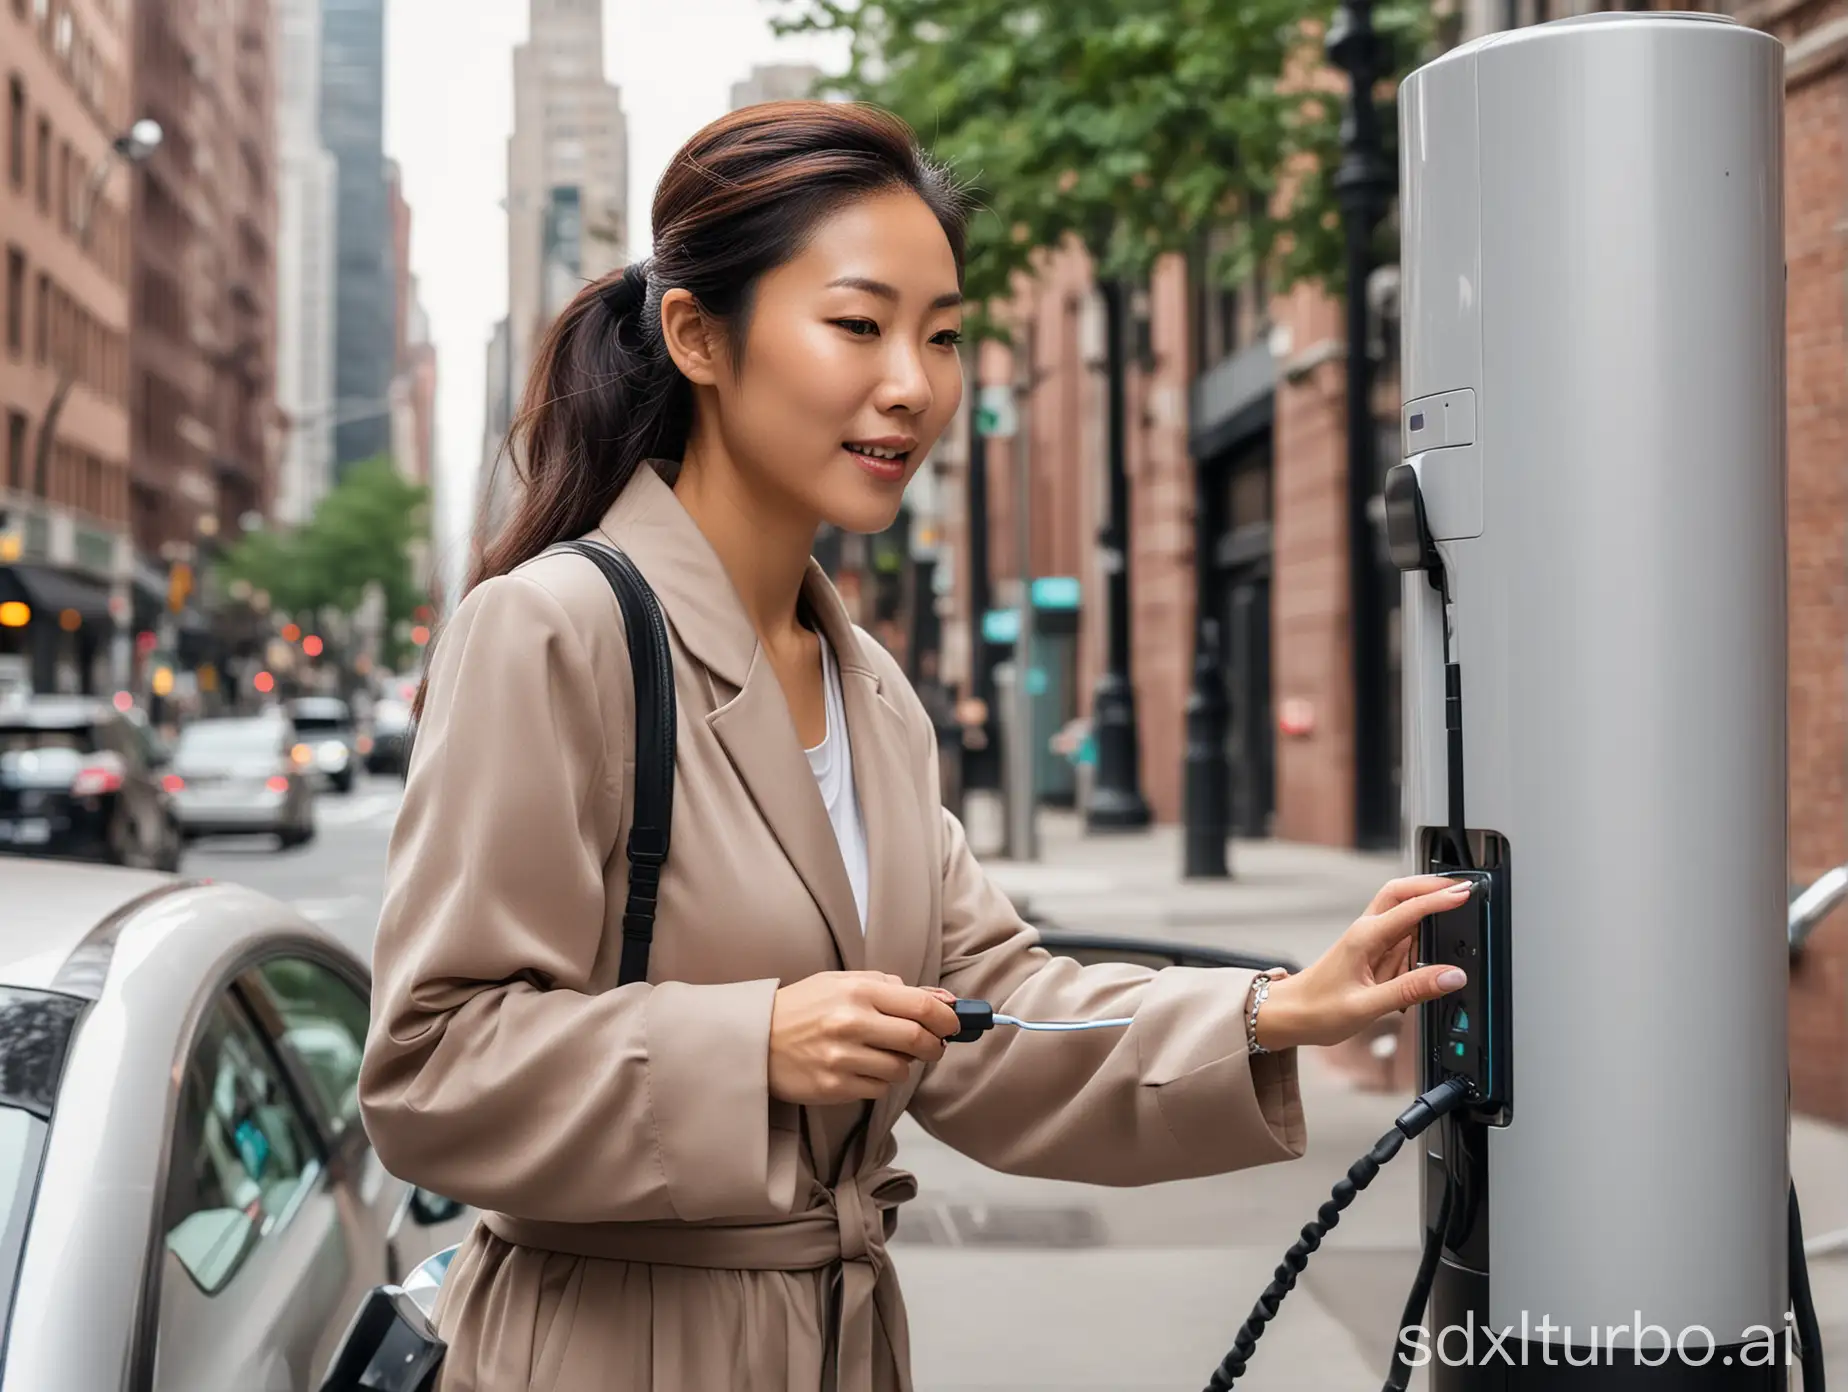 Stylish-Blind-Asian-Woman-Plugs-EV-Charging-Cable-in-NYC-Street-Scene